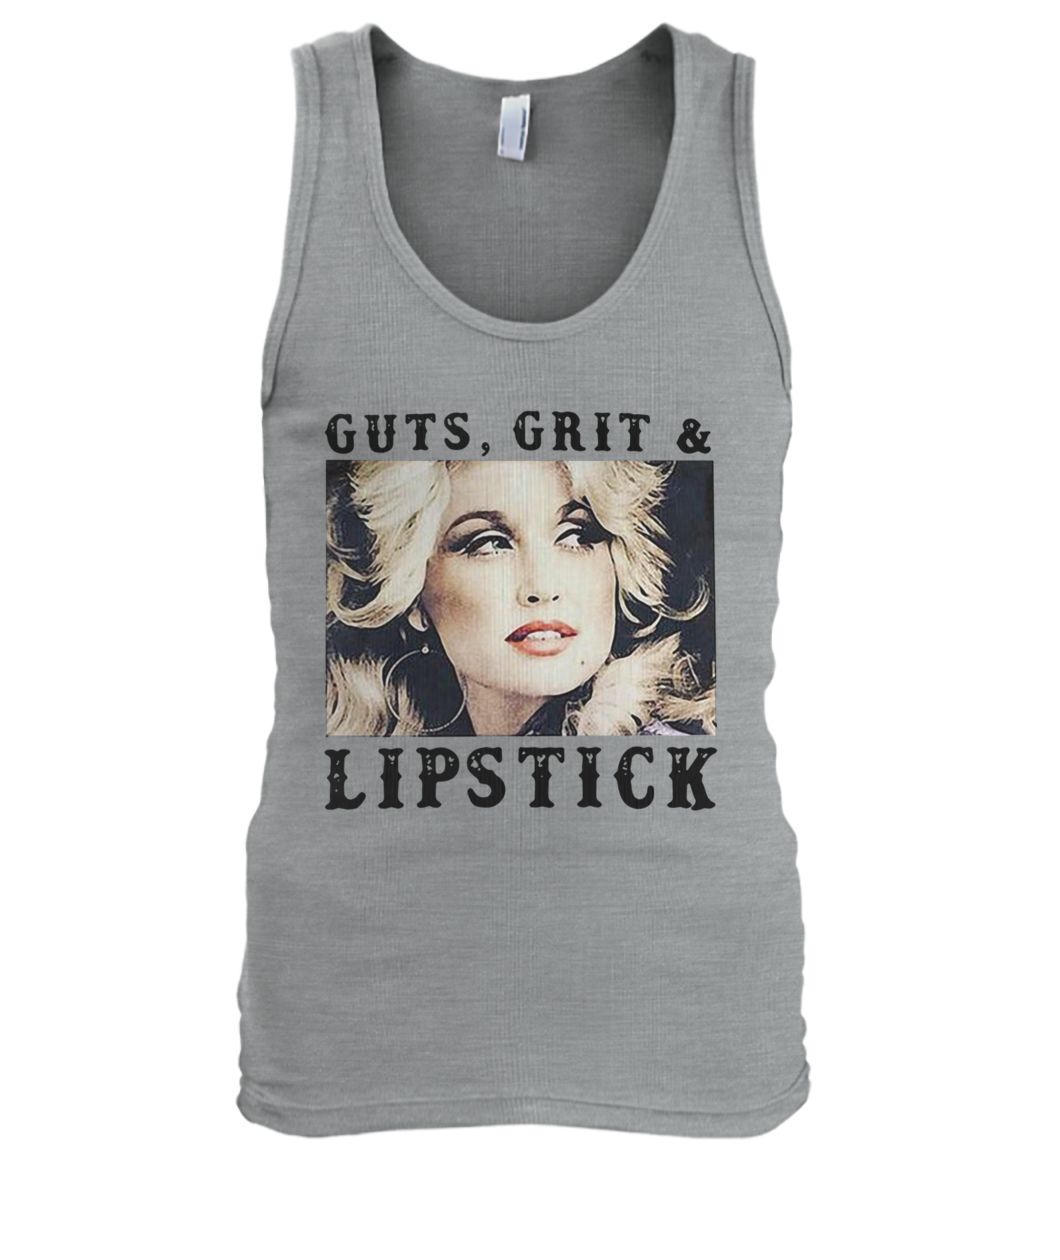 Dolly parton guts grits and lipstick men's tank top